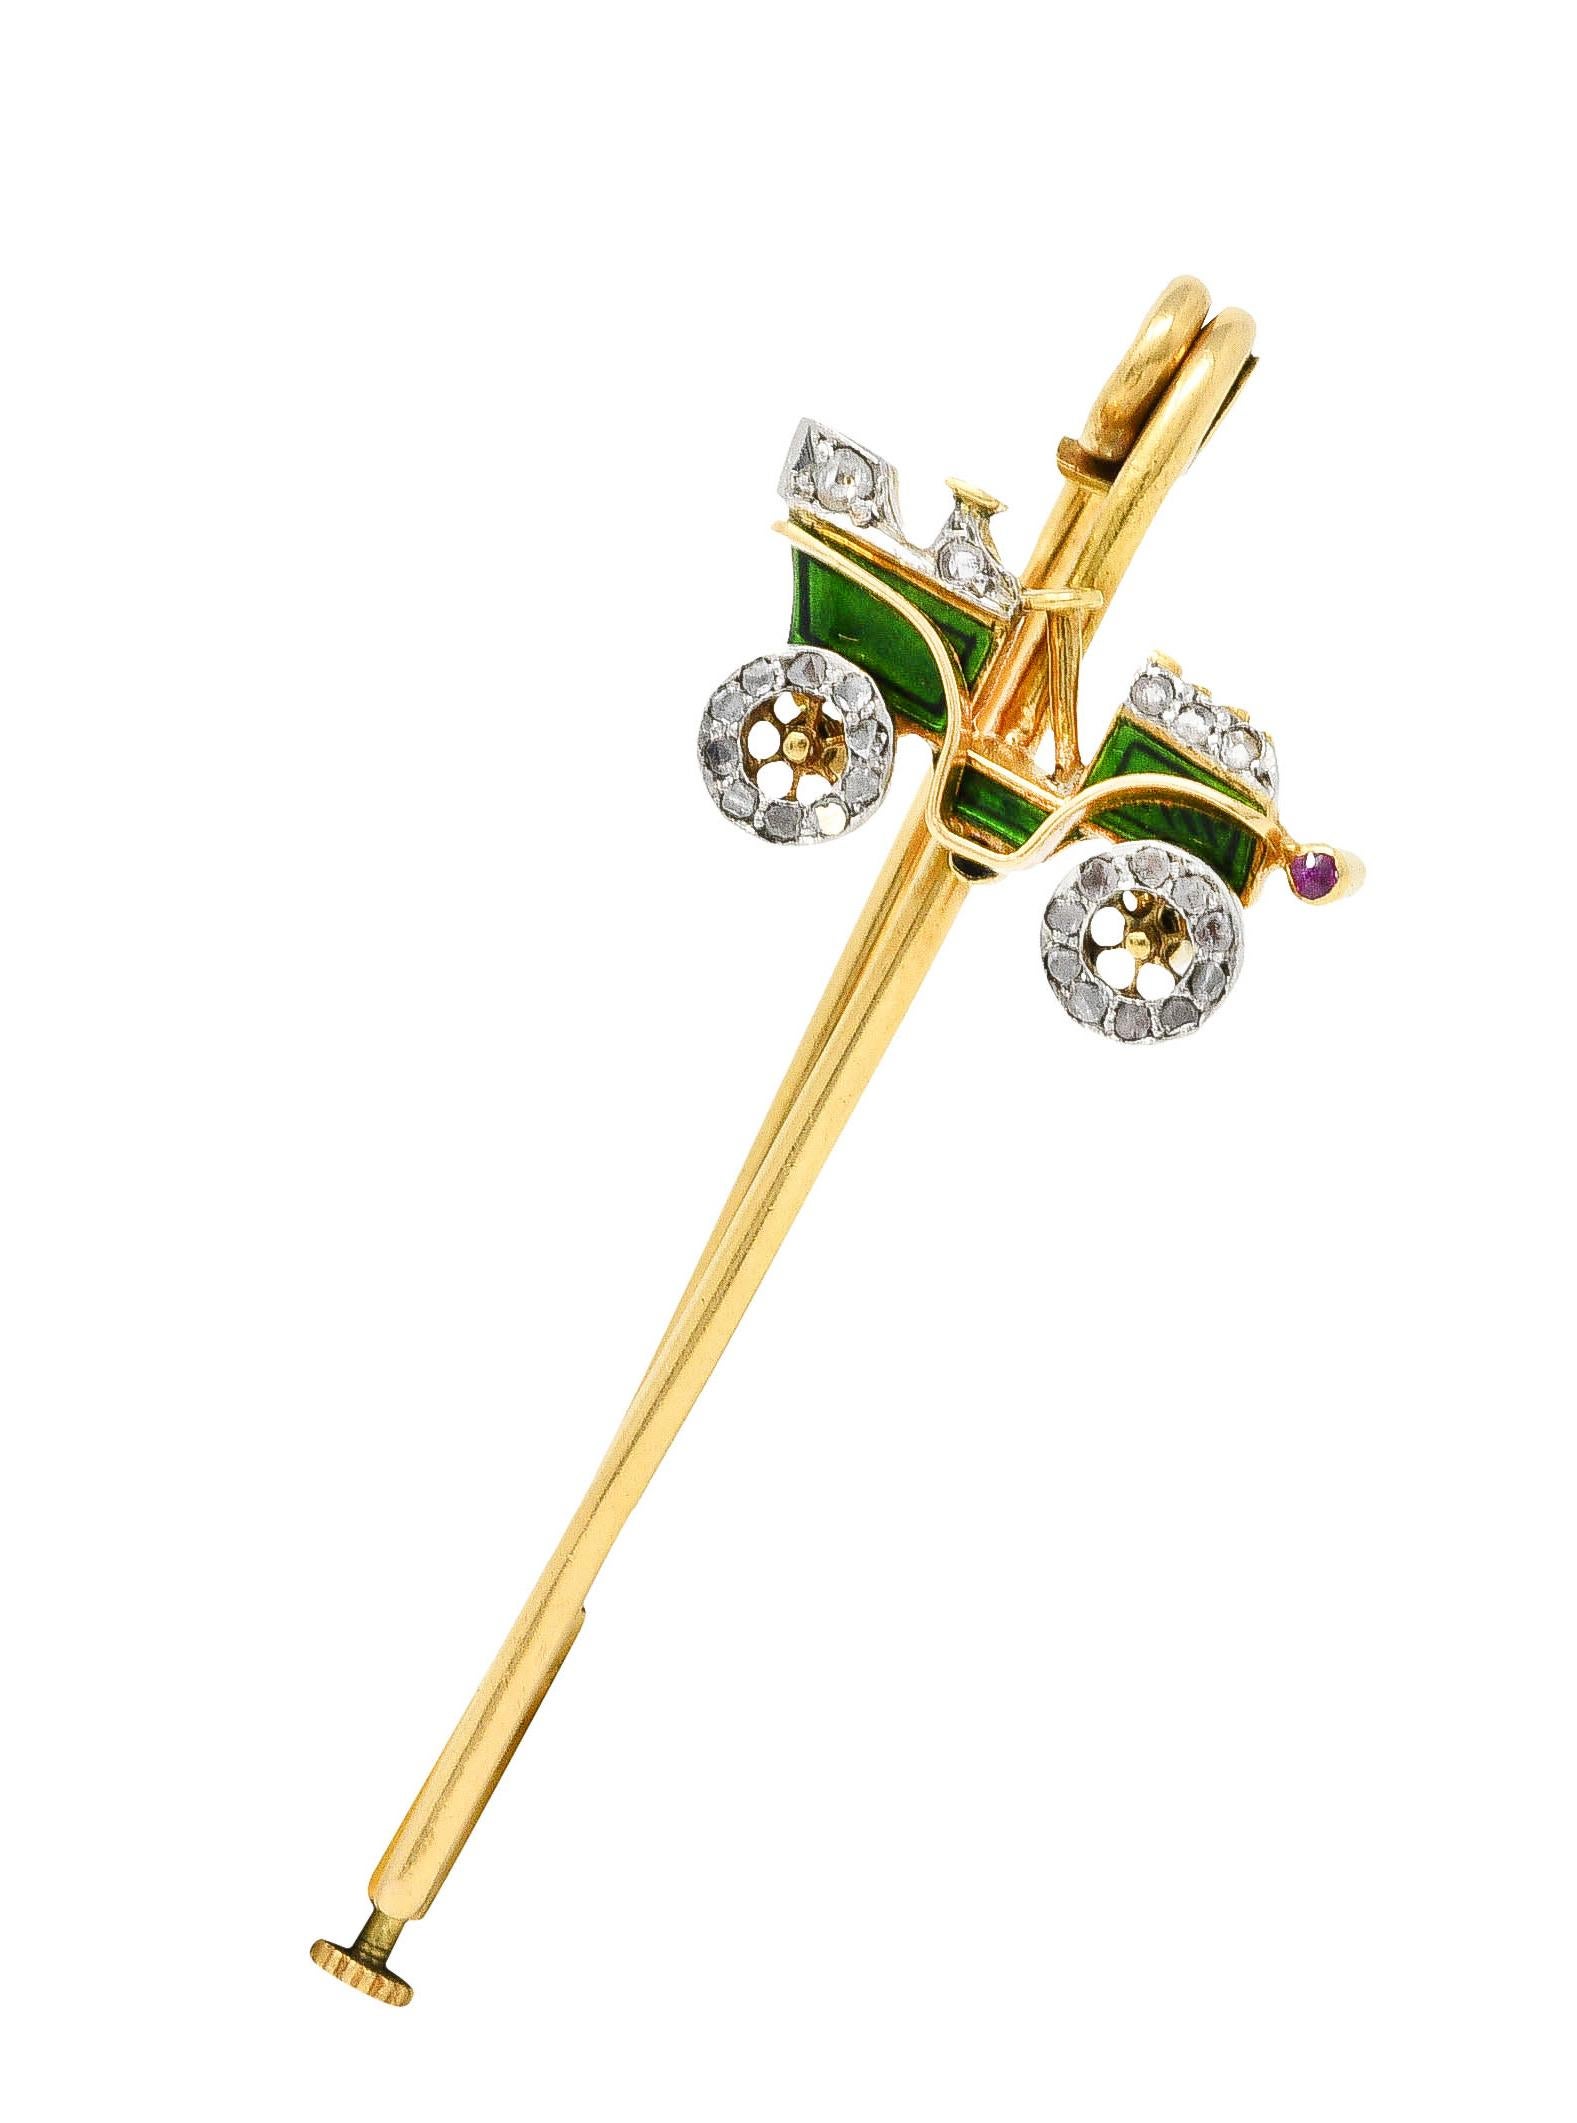 Gold safety pin features a depiction of an antique car

Glossed in bright green enamel with articulated spinning wheels

Accented throughout by rose cut diamonds and has one ruby as a headlight

Completed by a pin stem with plunging clasp

With